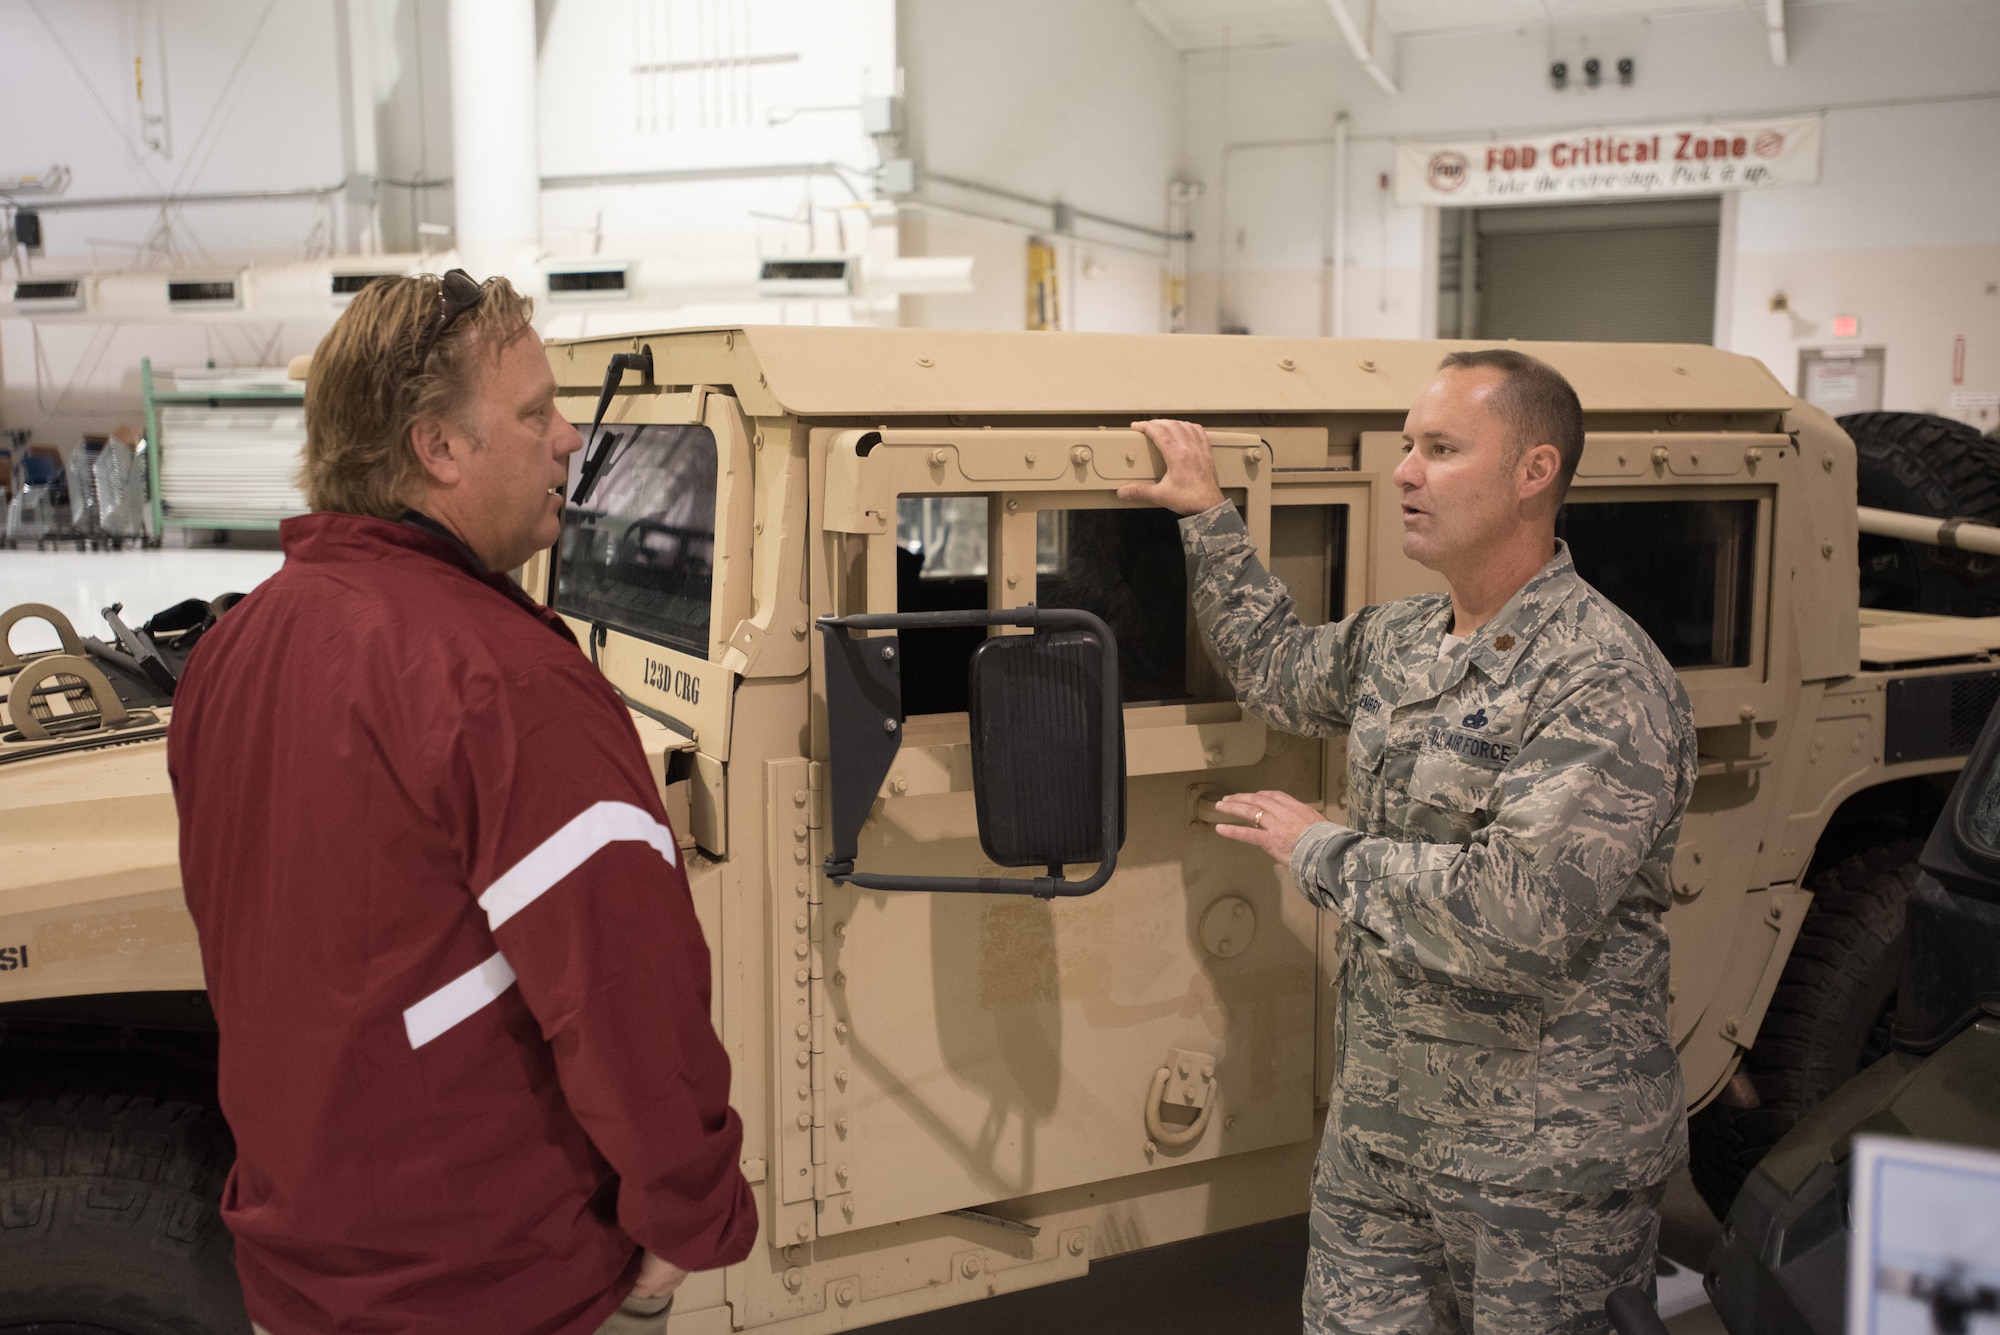 Maj. James Embry, director of operations for the 123rd Global Mobility Squadron, explains contingency response operations to Tom Raver, owner of Fireplace Distributors Inc., during an Employer Support of the Guard and Reserve “Bosslift” at the Kentucky Air National Guard Base in Louisville, Ky., Oct. 26, 2016. The Bosslift gave civilian employers an opportunity to learn more about what their employees do when serving as reservists in the Kentucky Air National Guard. (U.S. Air National Guard photo by Master Sgt. Phil Speck)